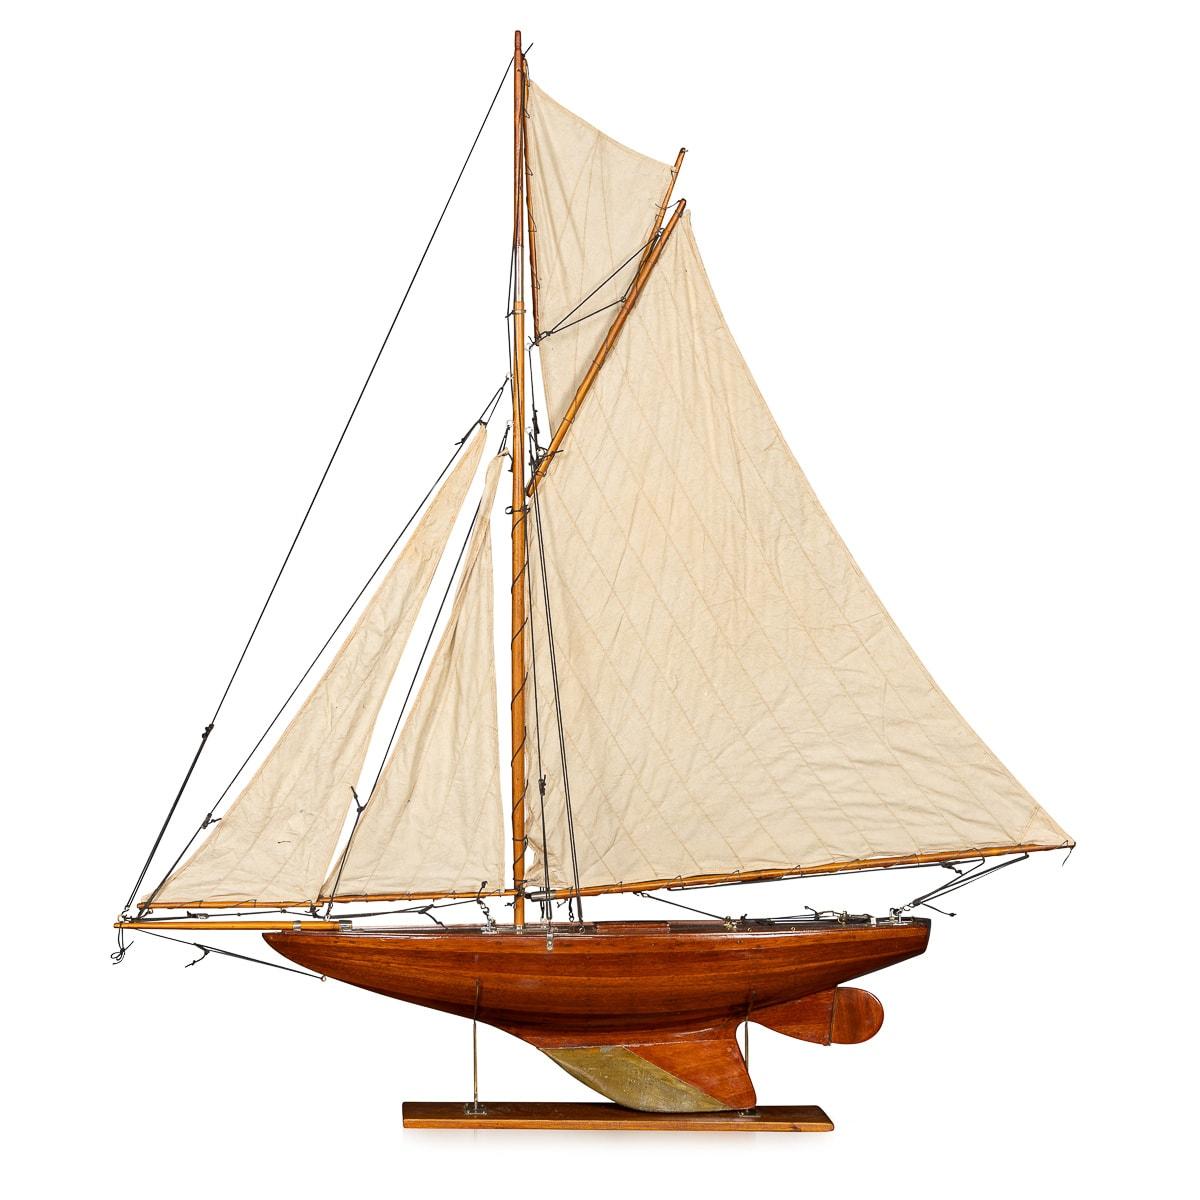 A fantastic Gaff Cutter pond yacht, lovely “bread and butter“ wood hull construction dating to the early part of the 20th Century. This particular pond yacht features original calico sails, rigged with chrome fittings and also a weighted keel,